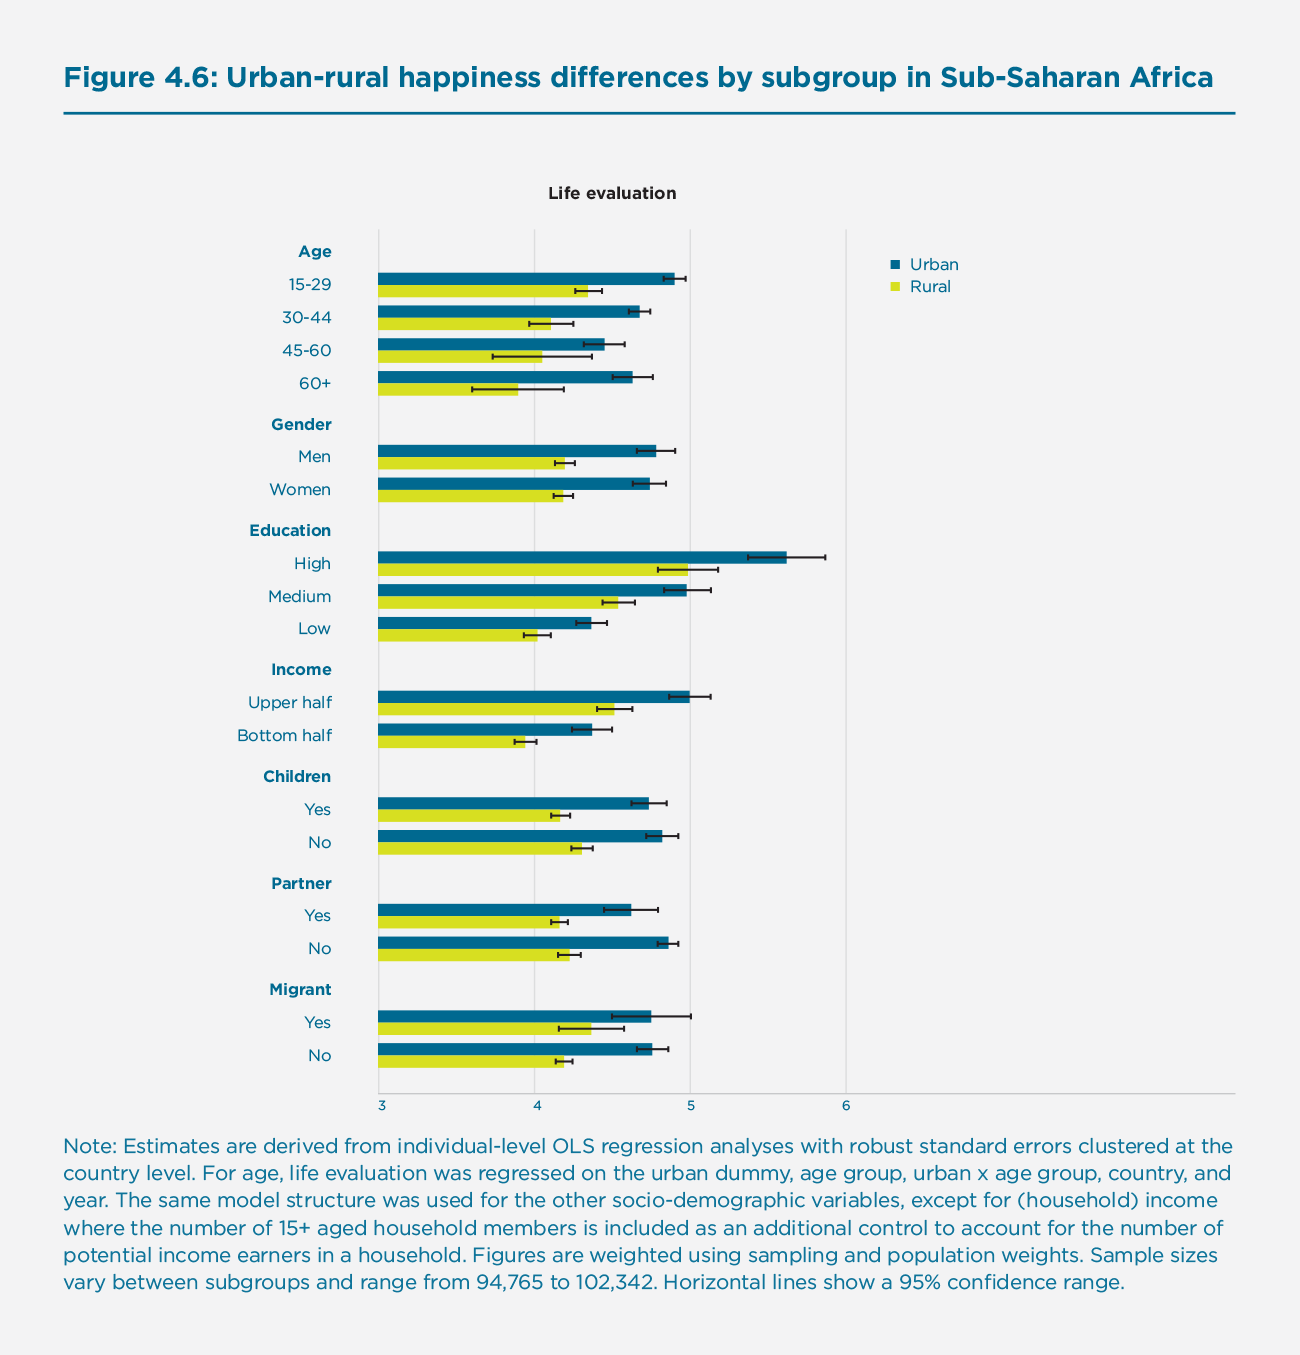  Figure 4.6: Urban-rural happiness differences by subgroup in Sub-Saharan Africa